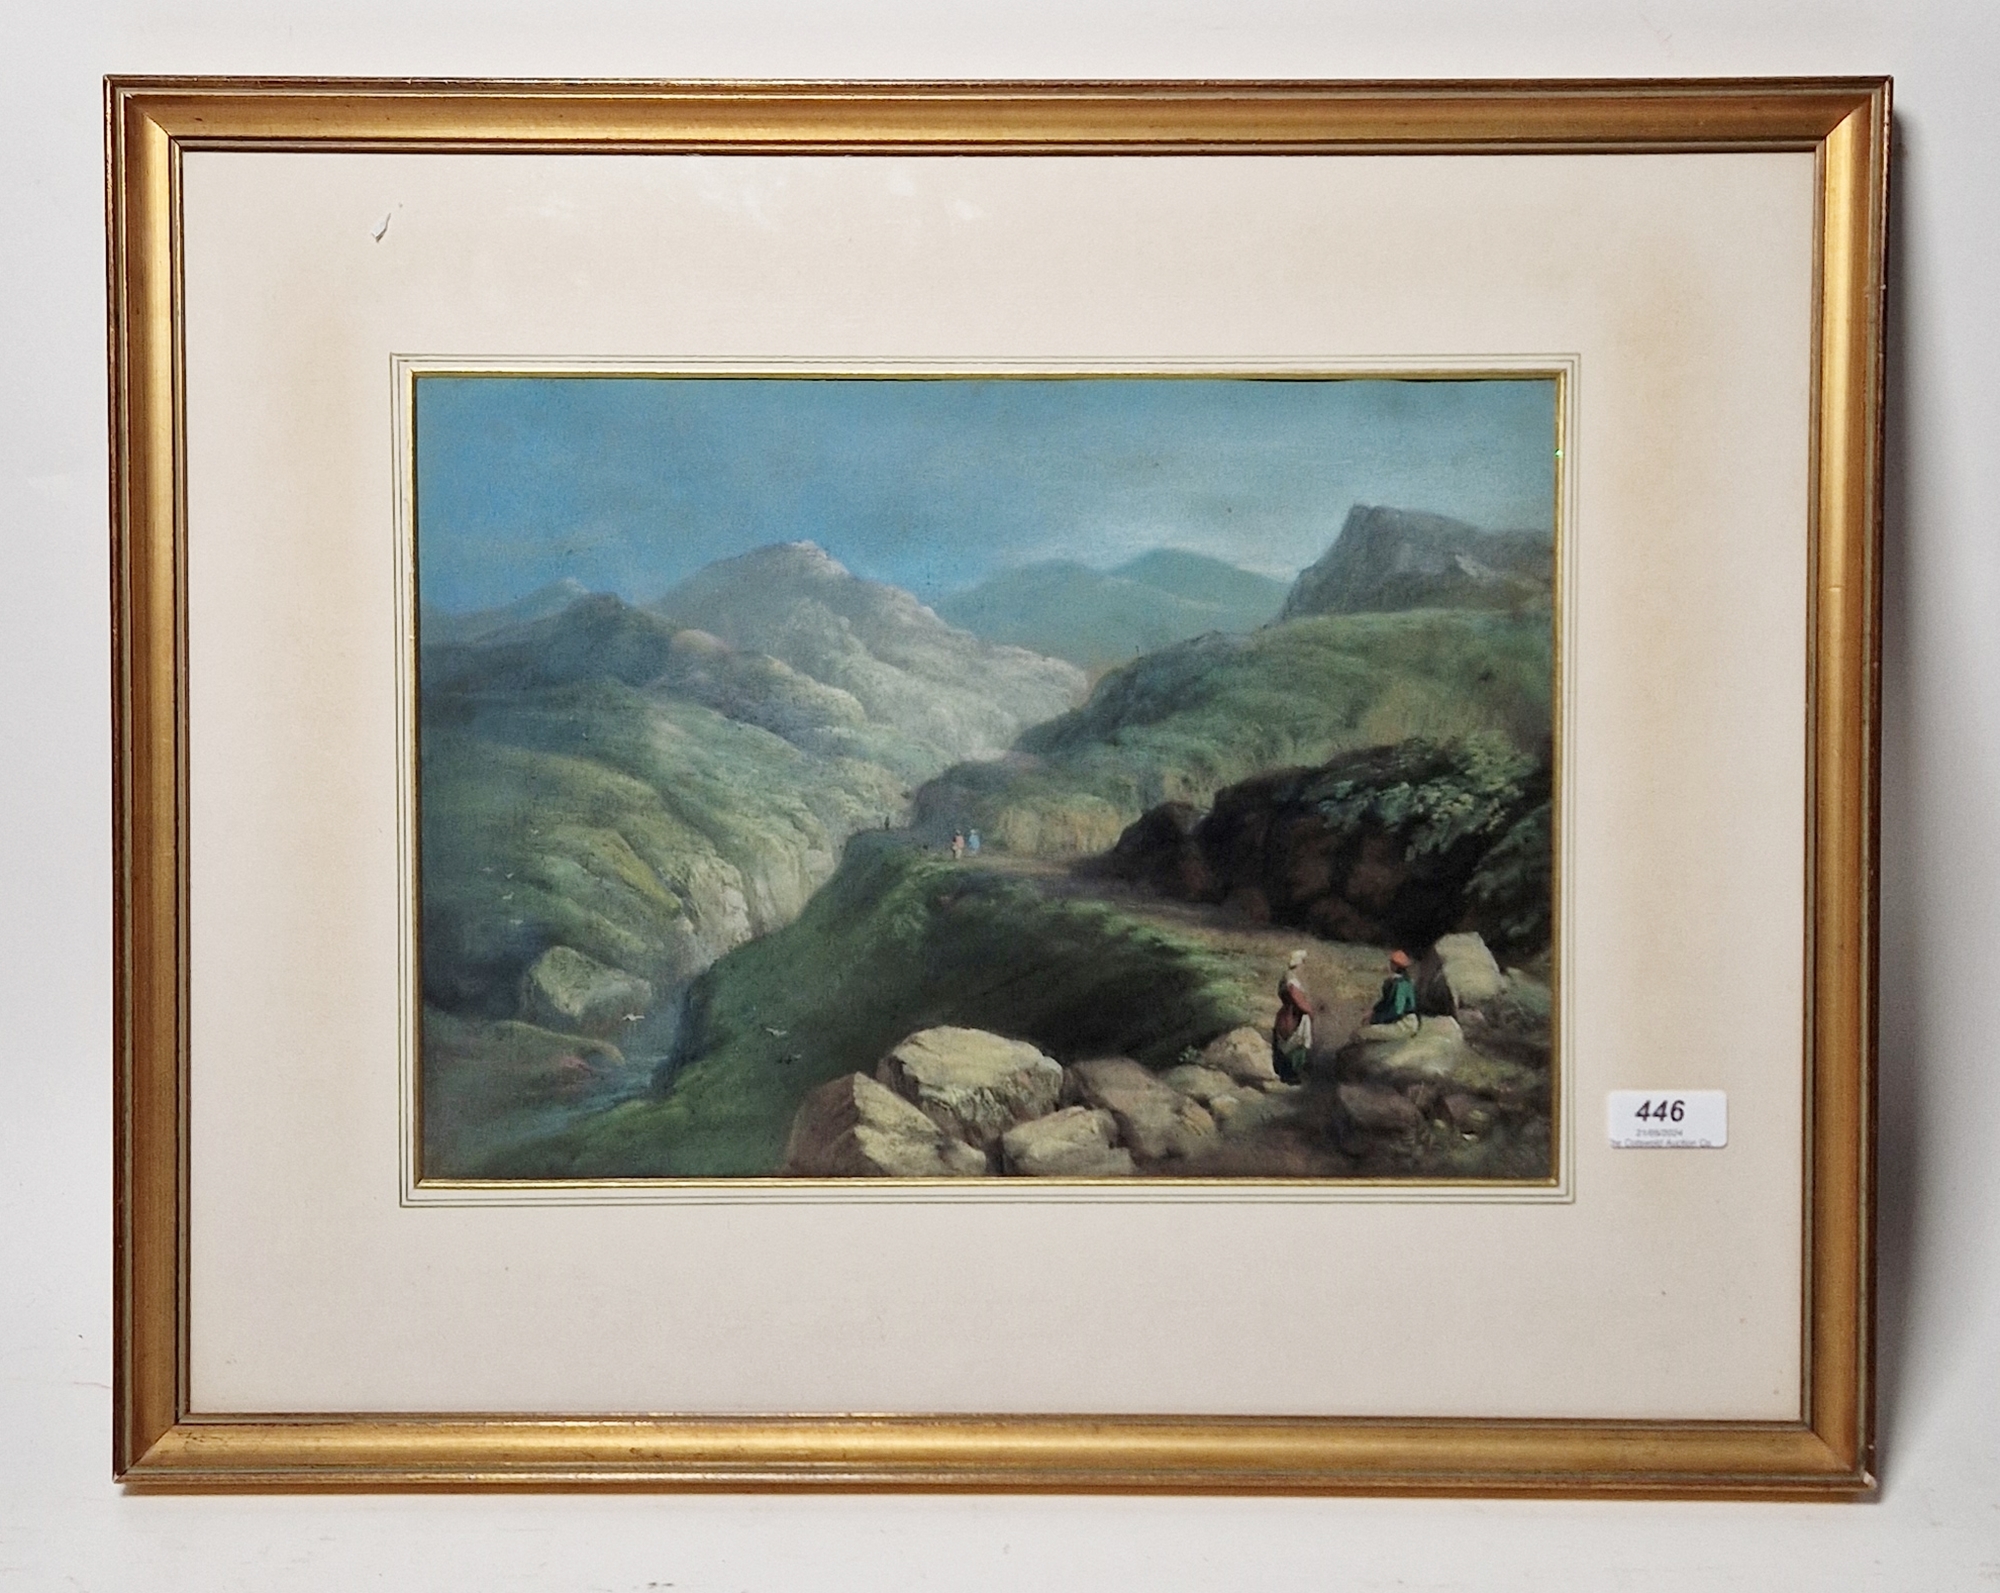 19th century continental school Pastel on paper Mountain scape with figures on a path, - Image 2 of 2